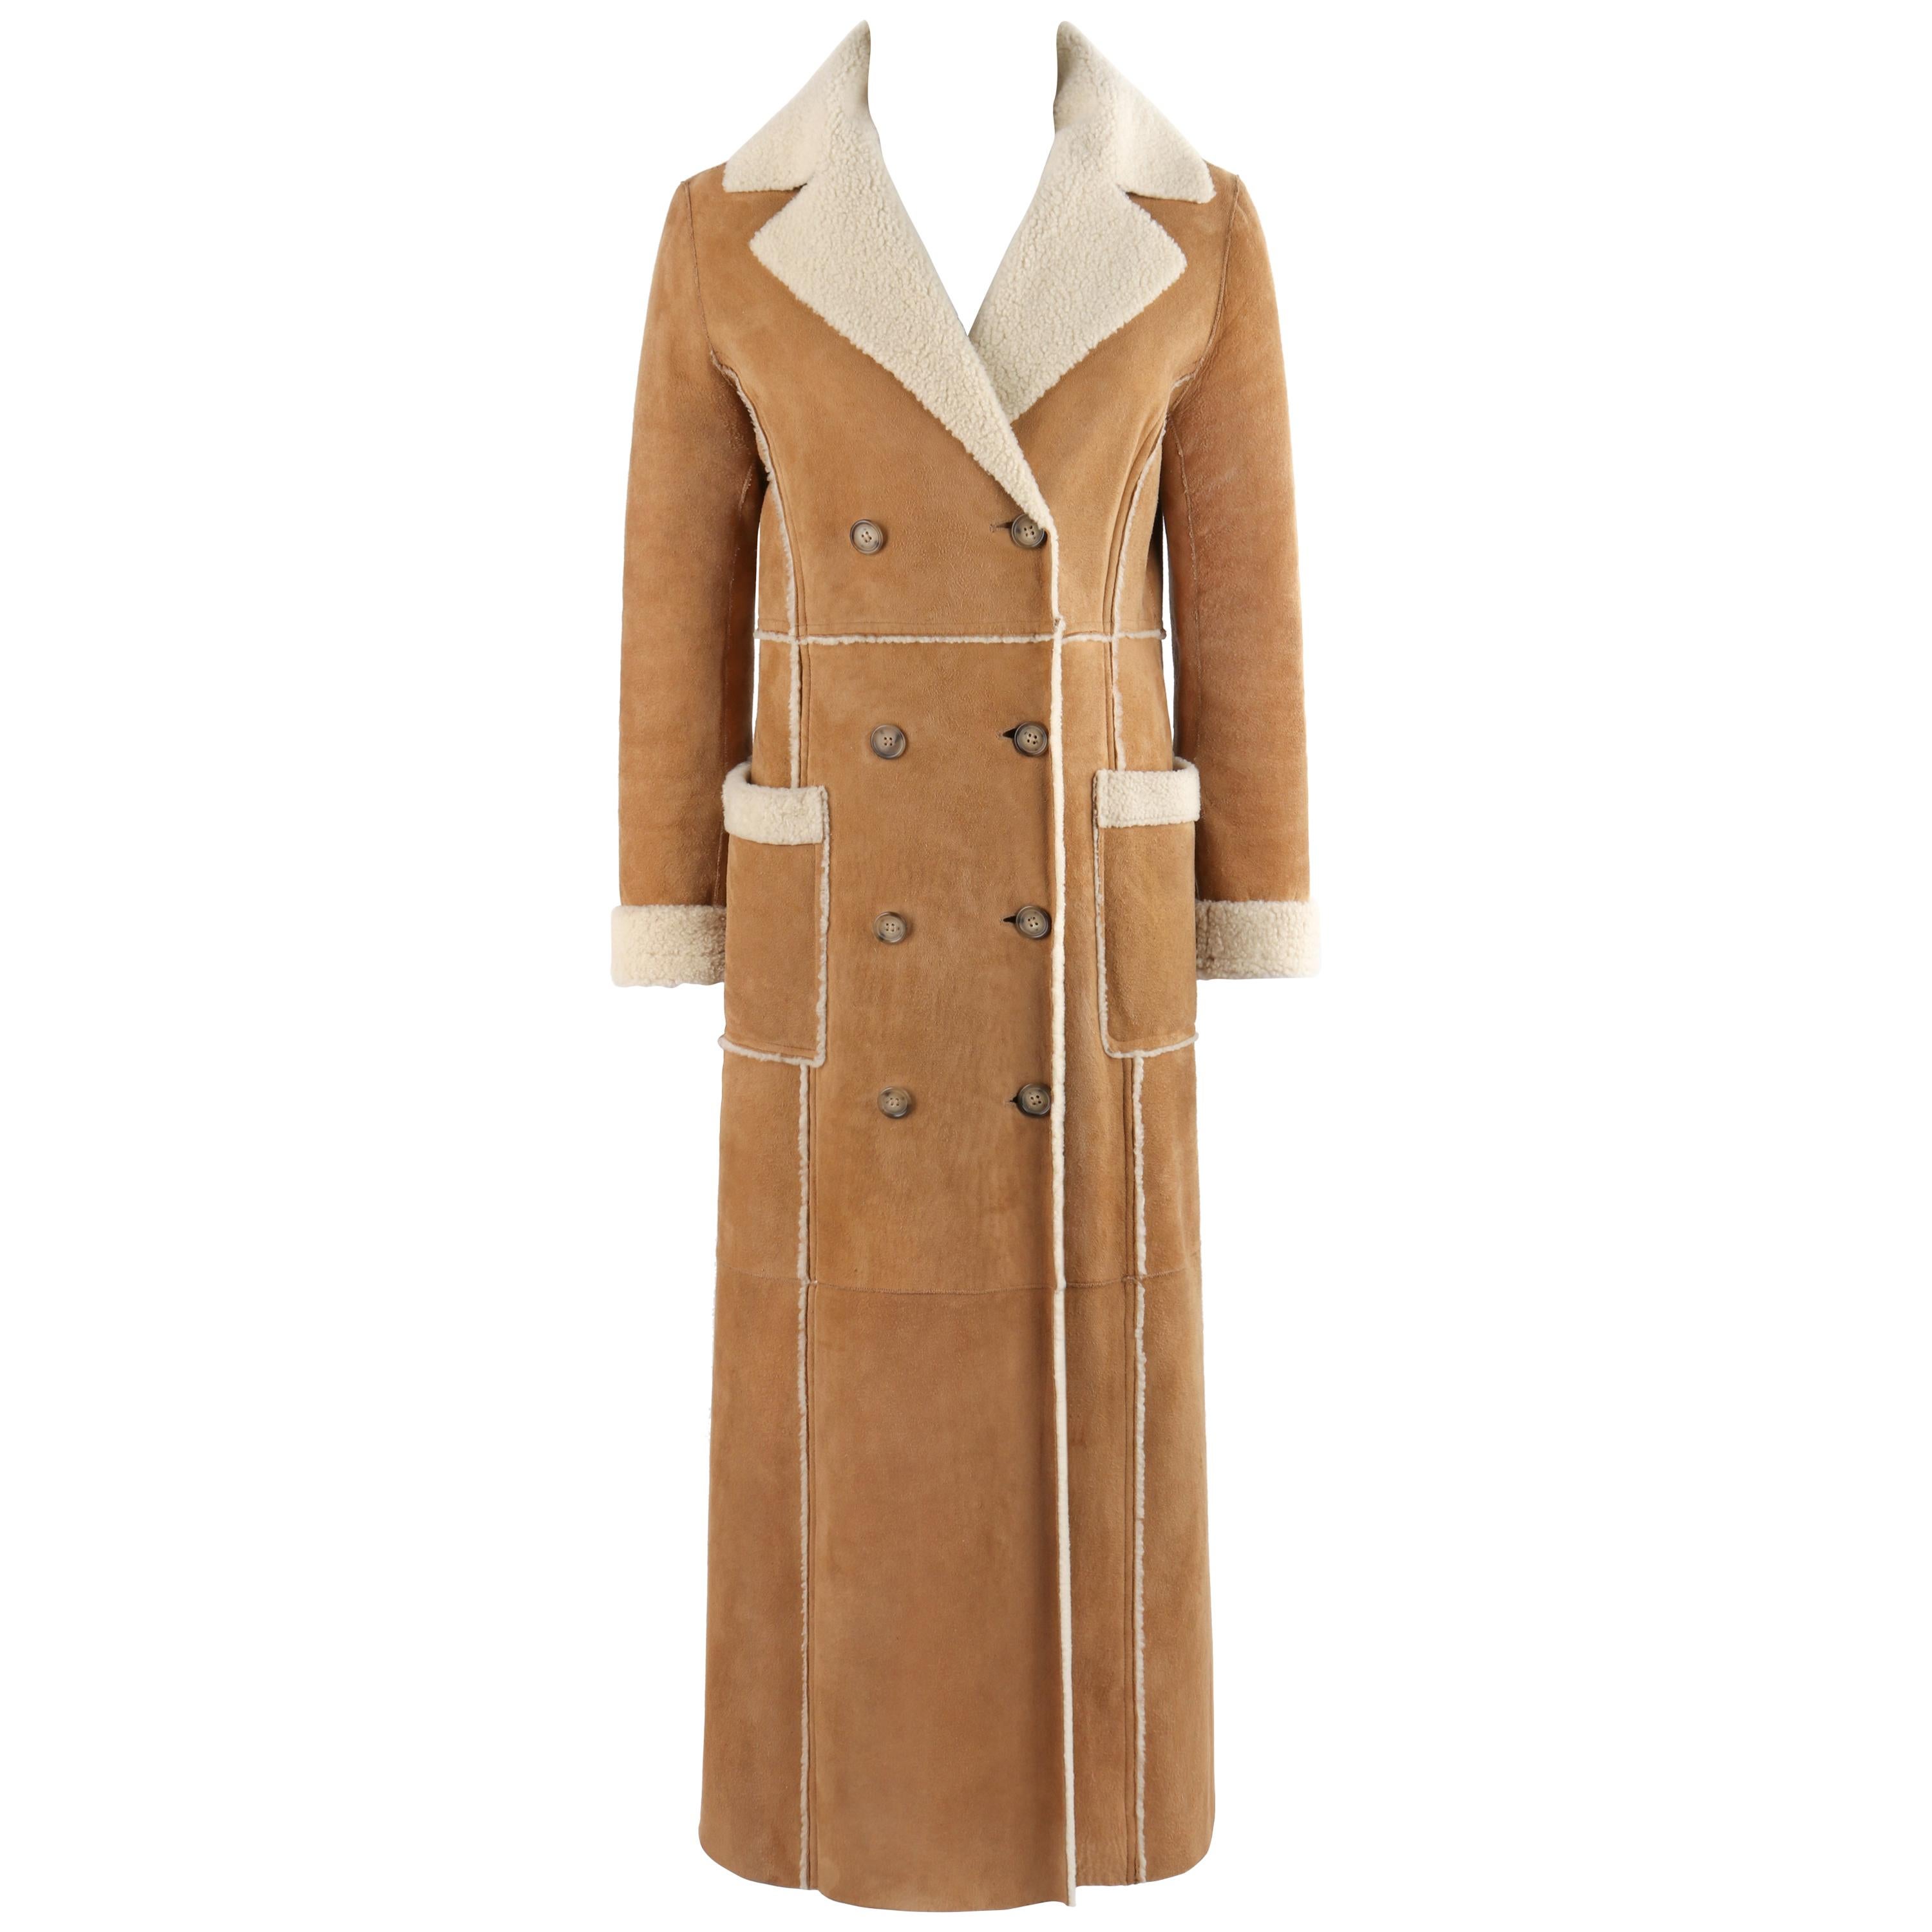 KORS by MICHAEL KORS Tan Suede Shearling Fur Double Breasted Full Length Coat